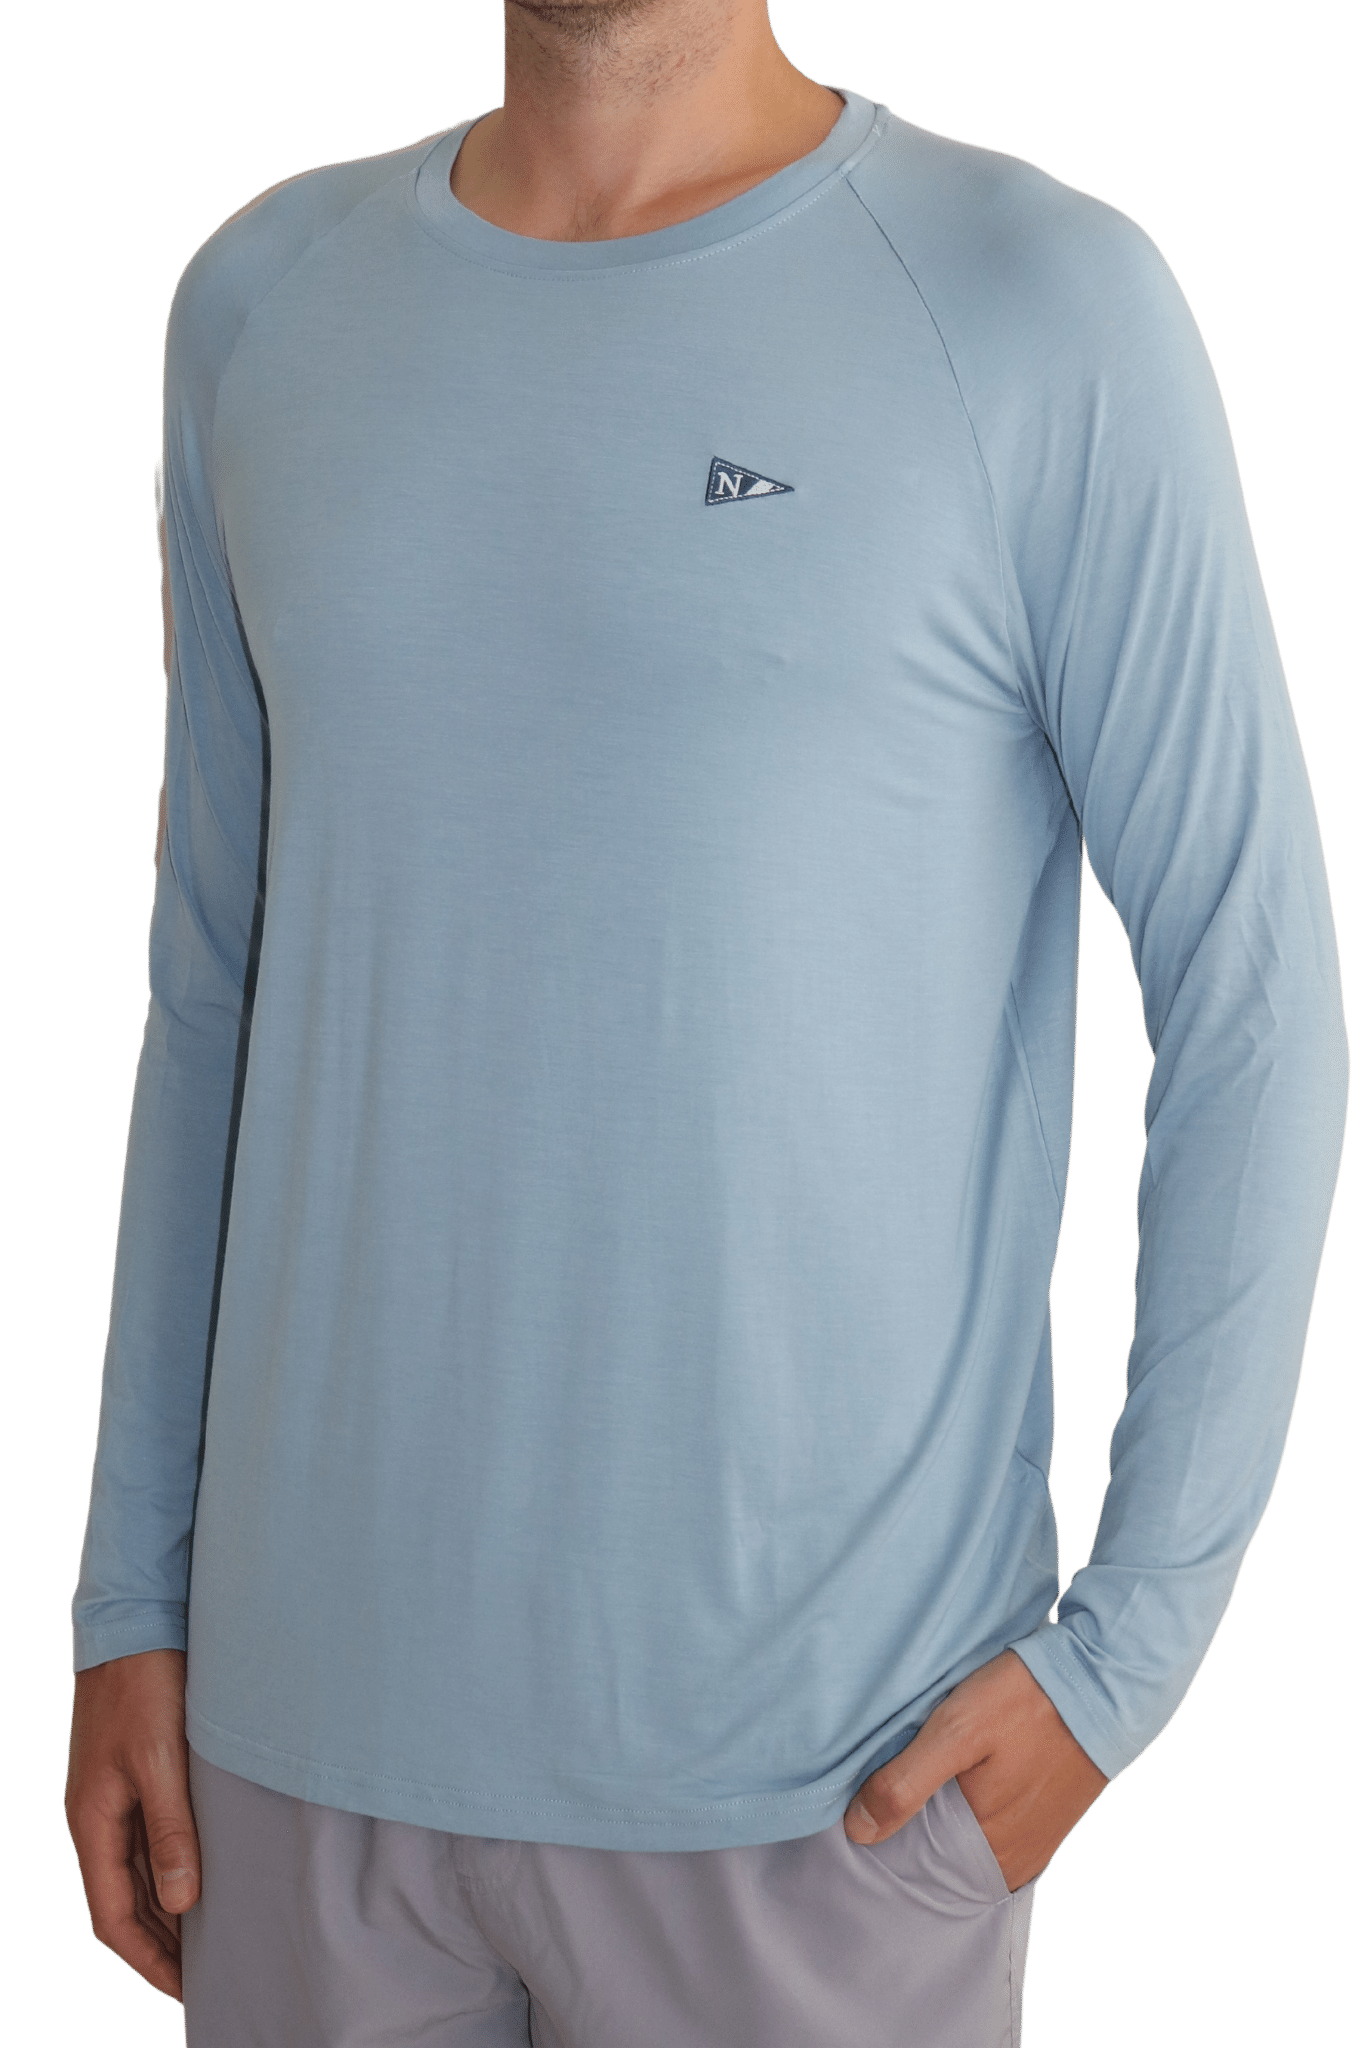 Front of the new light ocean blue icon long sleeve bamboo fishing shirt.